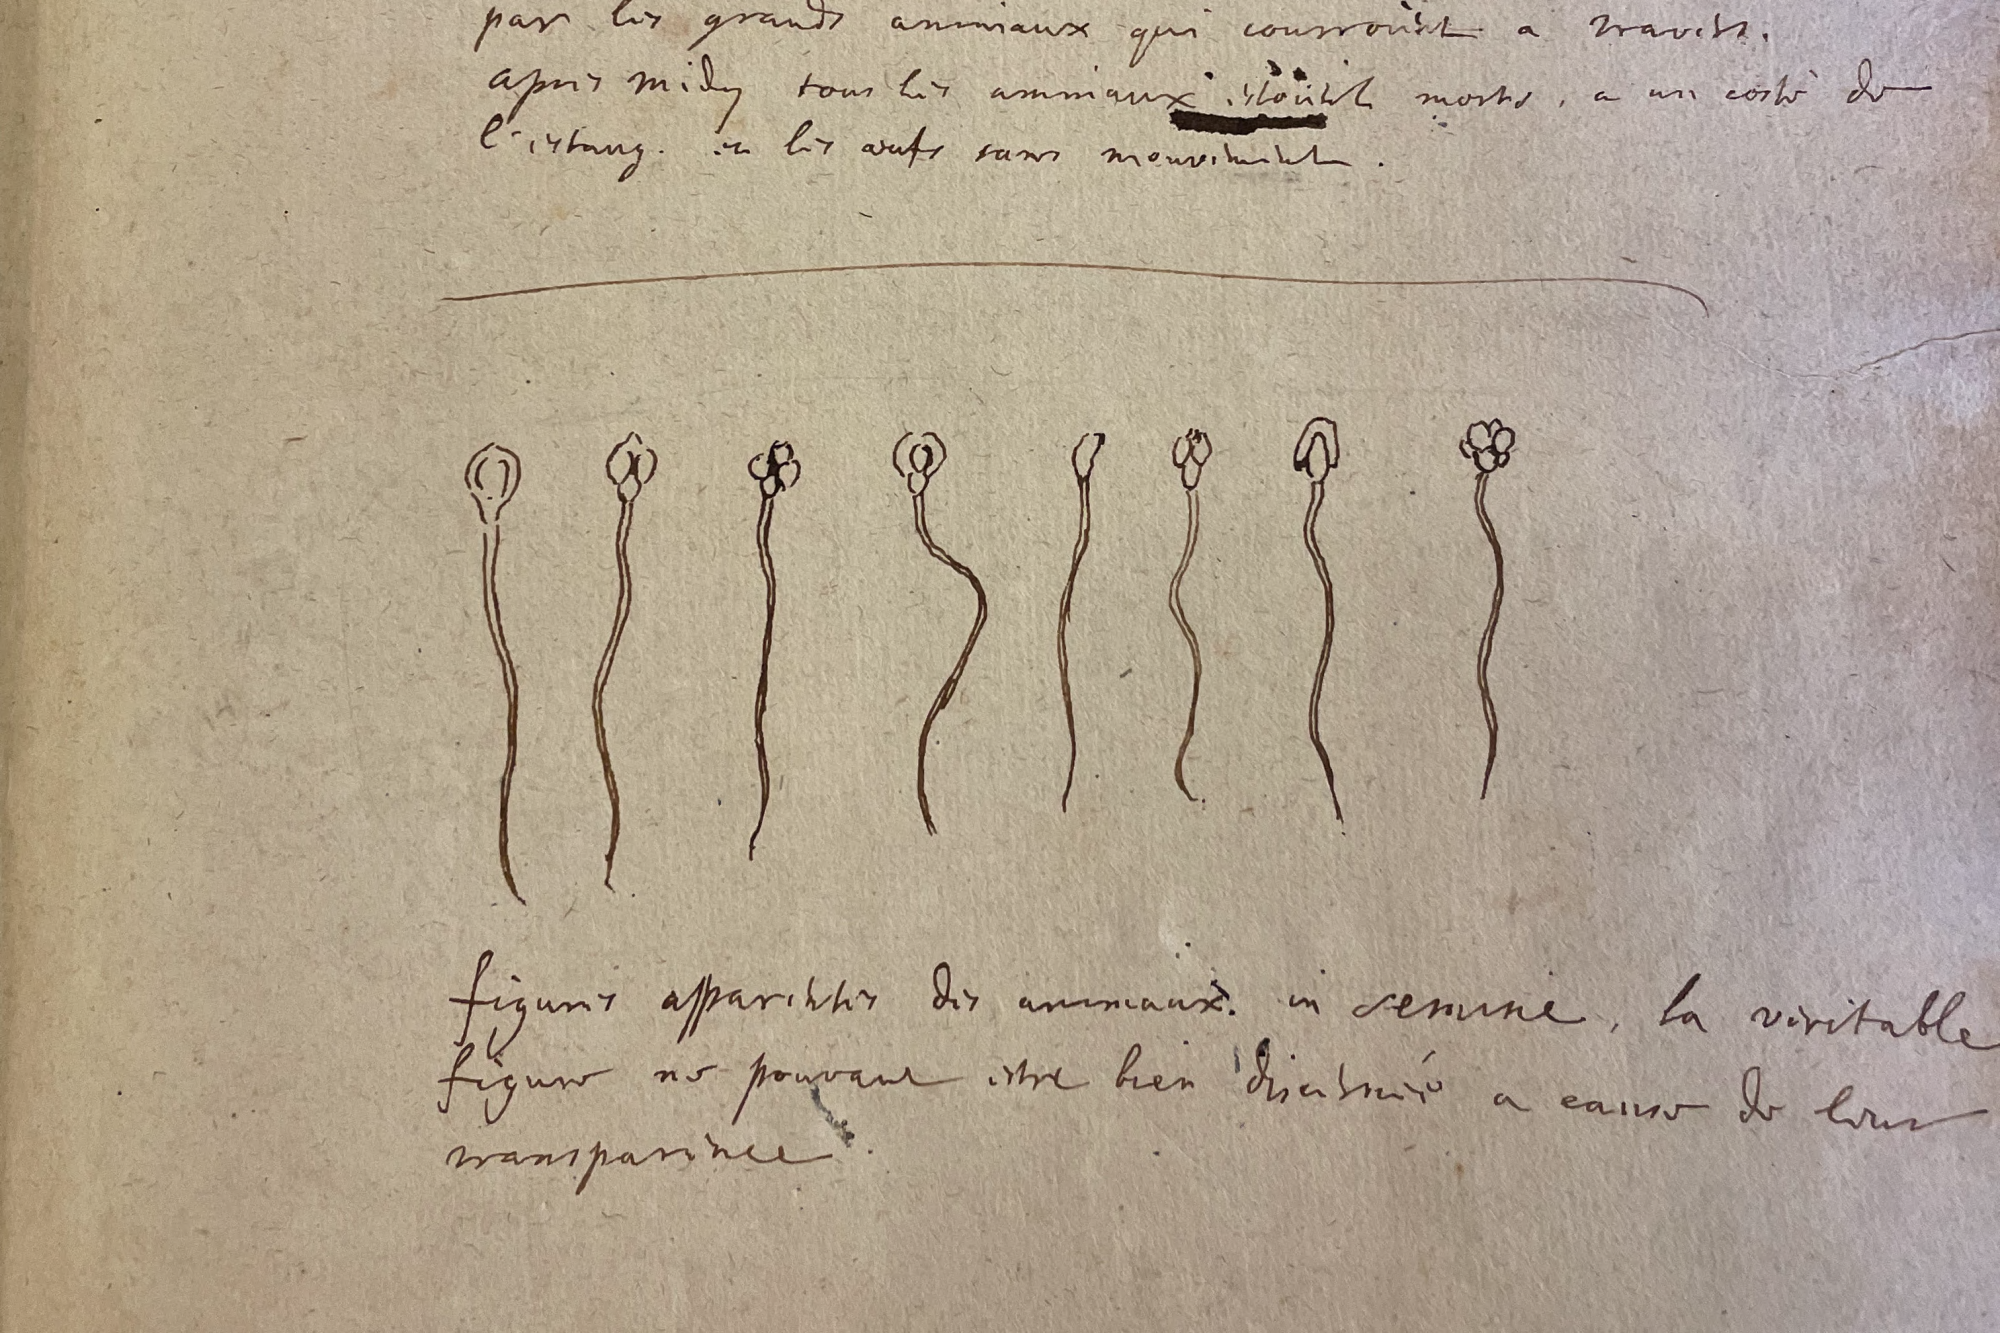 Huygens' observations with micropscope on sperm in Liber E. Fol. 61r. HUG 9. Leiden University Library